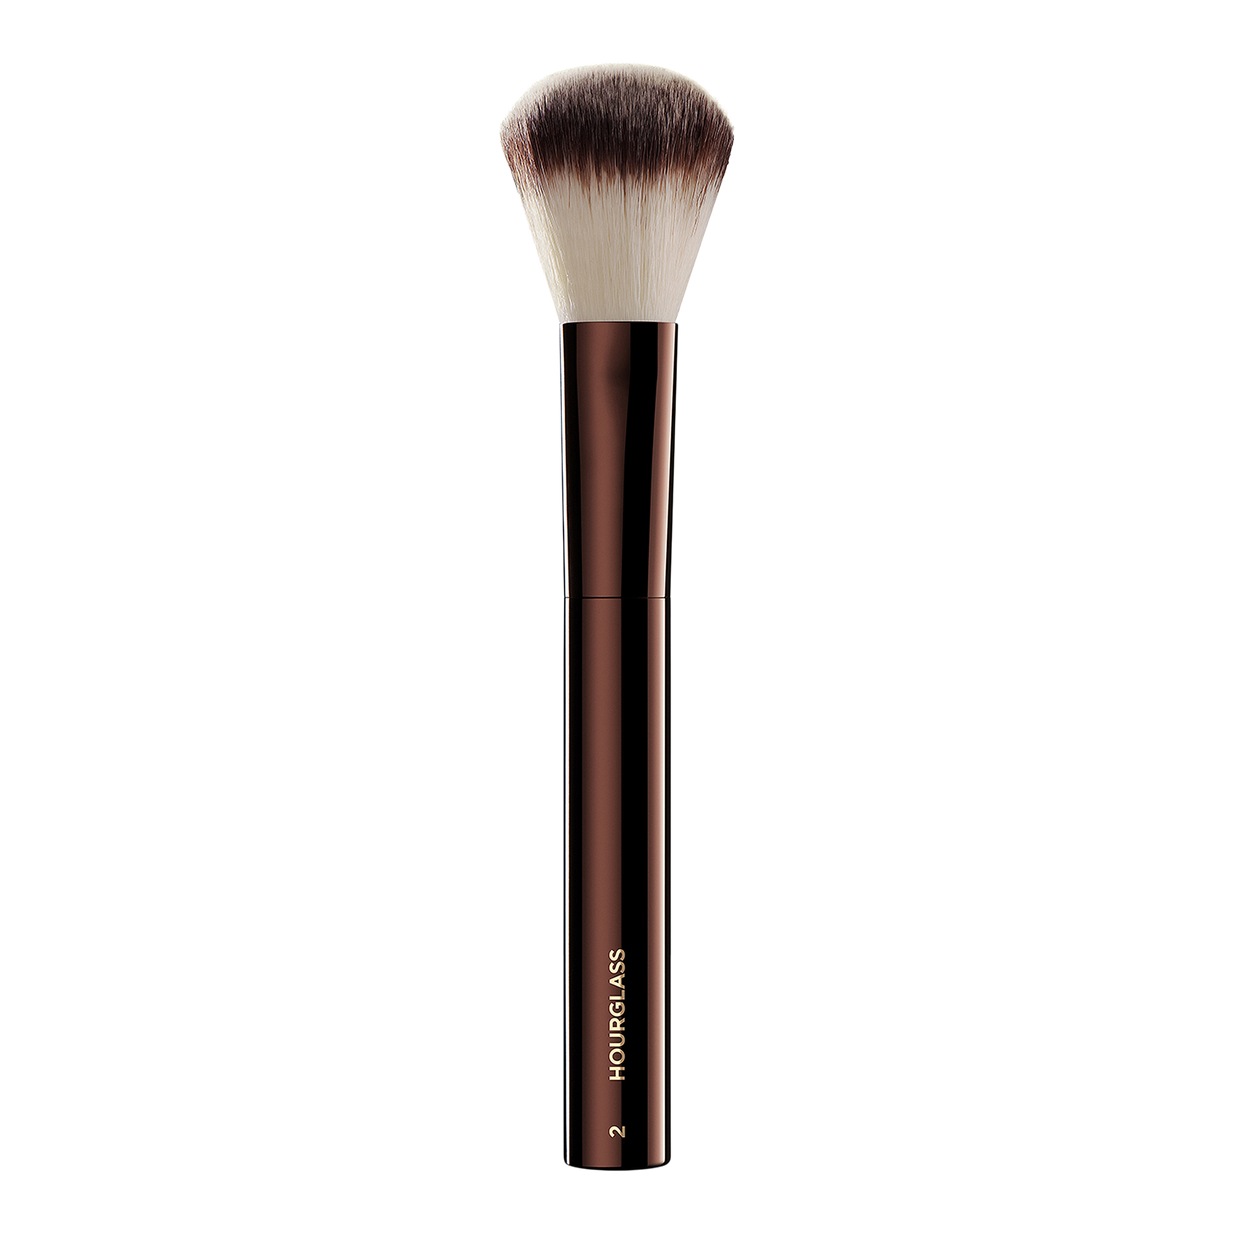 Which Type of Blush Brush to Use